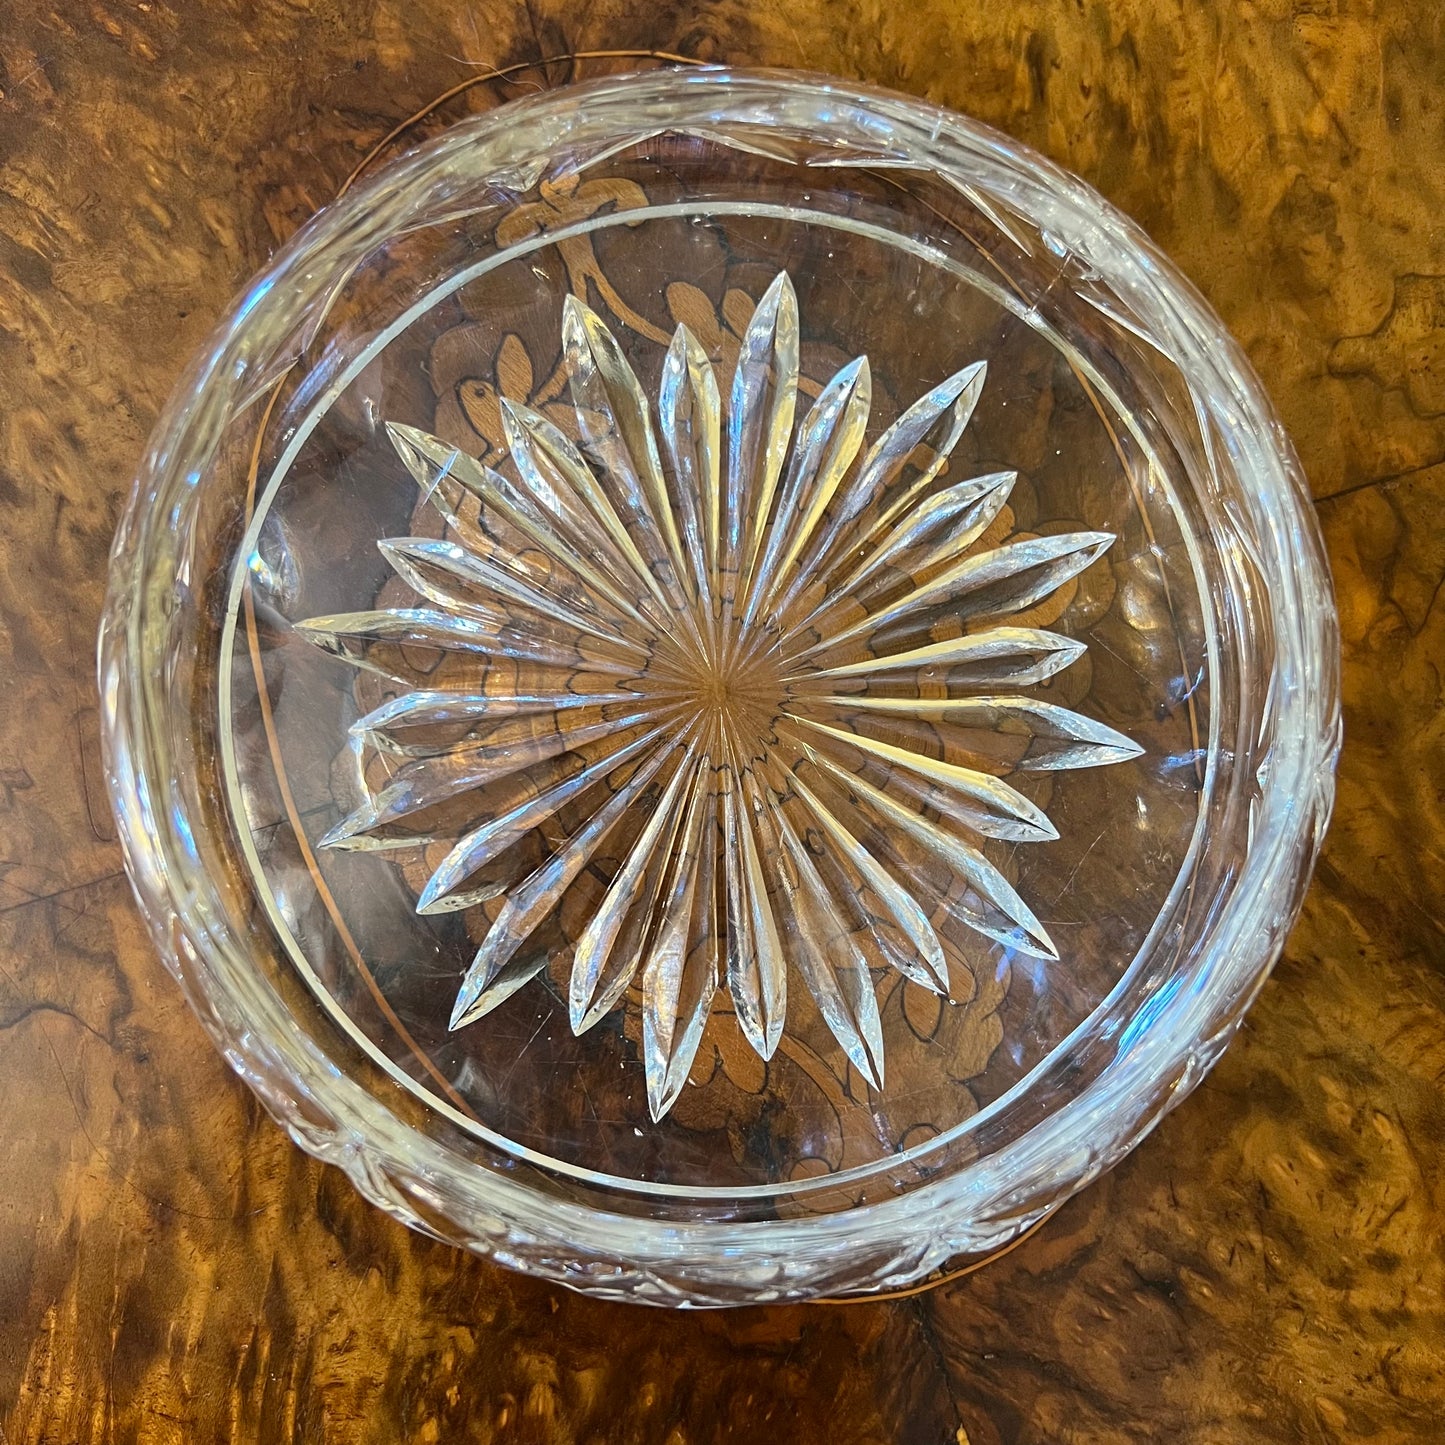 Vintage Crystal Round Bowl With Lid